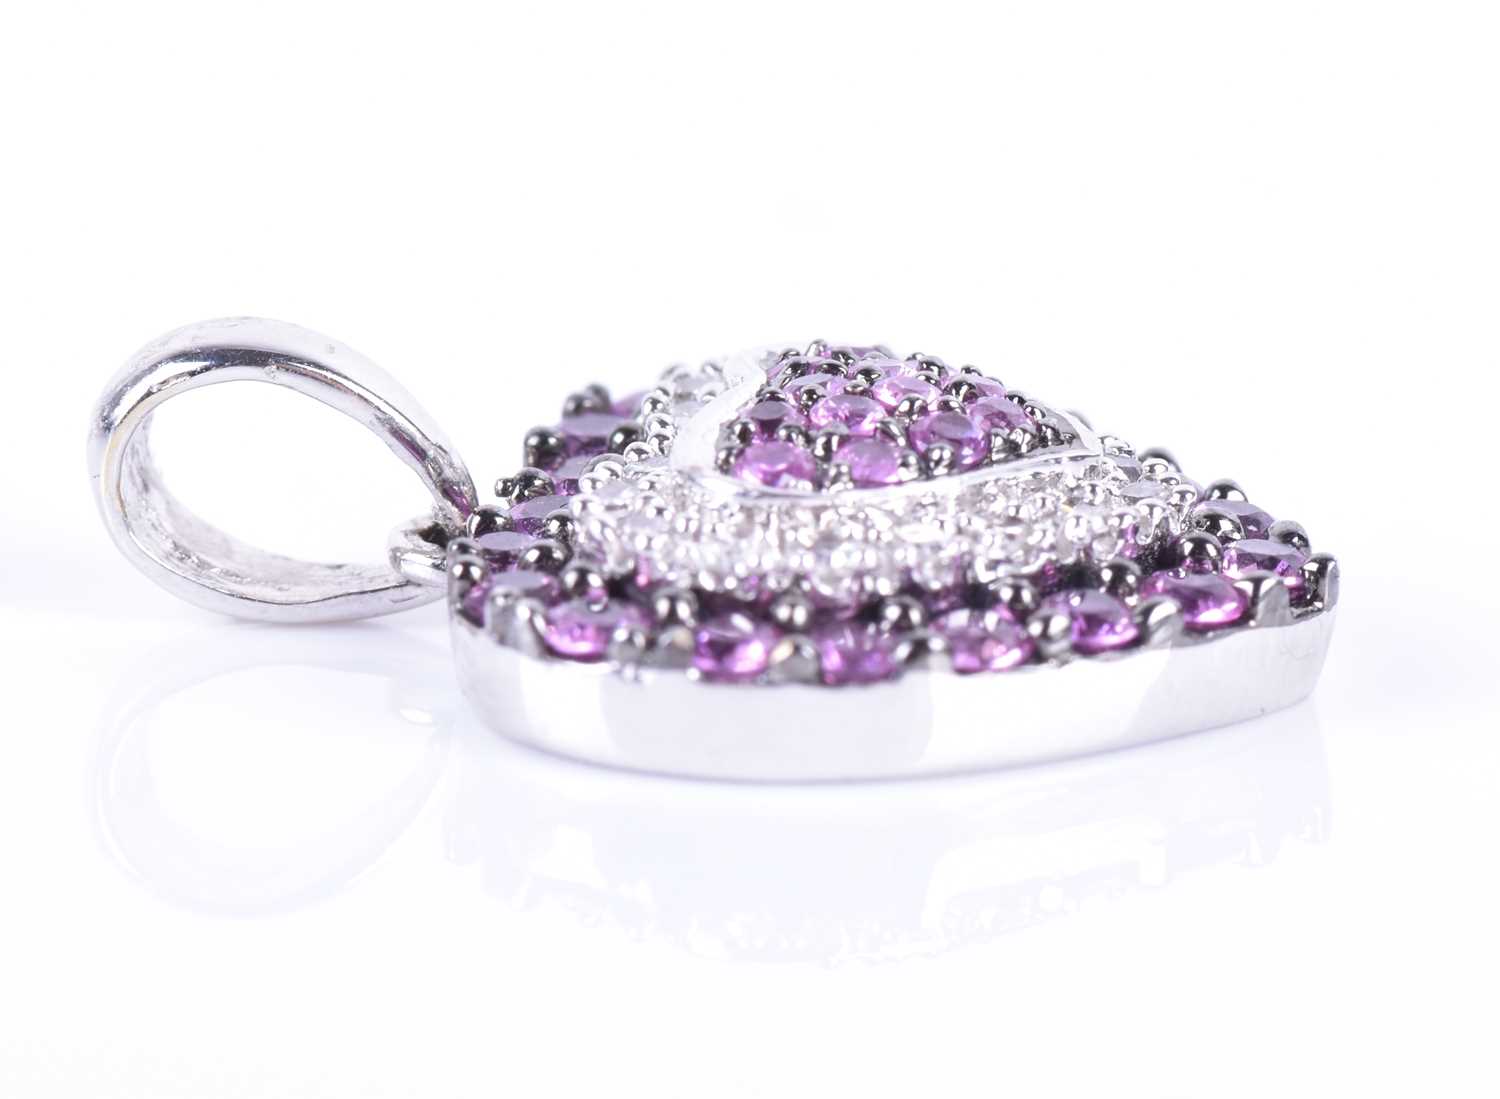 An 18ct white gold, diamond, and pink sapphire pendantof heart-shaped form, set with round-cut - Image 3 of 3